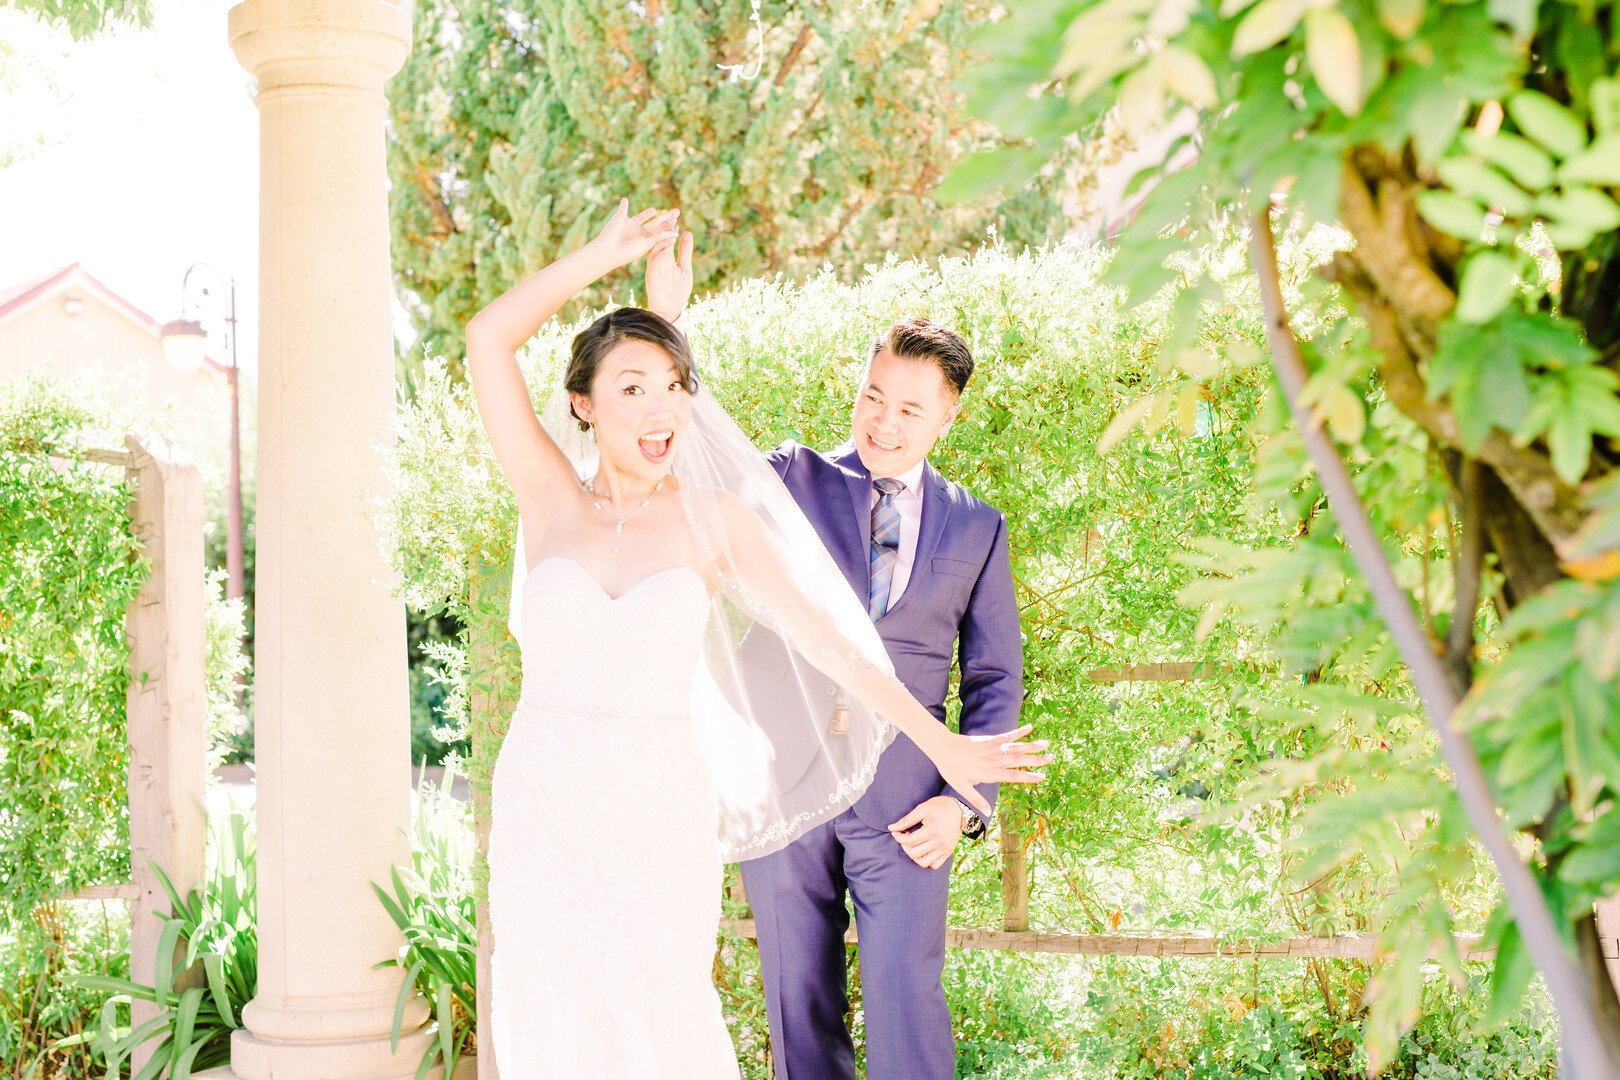 www.santabarbarawedding.com | Cali Paso Winery | Alyssa Lynne Photography | Danielle Stone Photography | All About Events | Paso Wedding Smith | Paso Robles Wedding Stylist | First Look